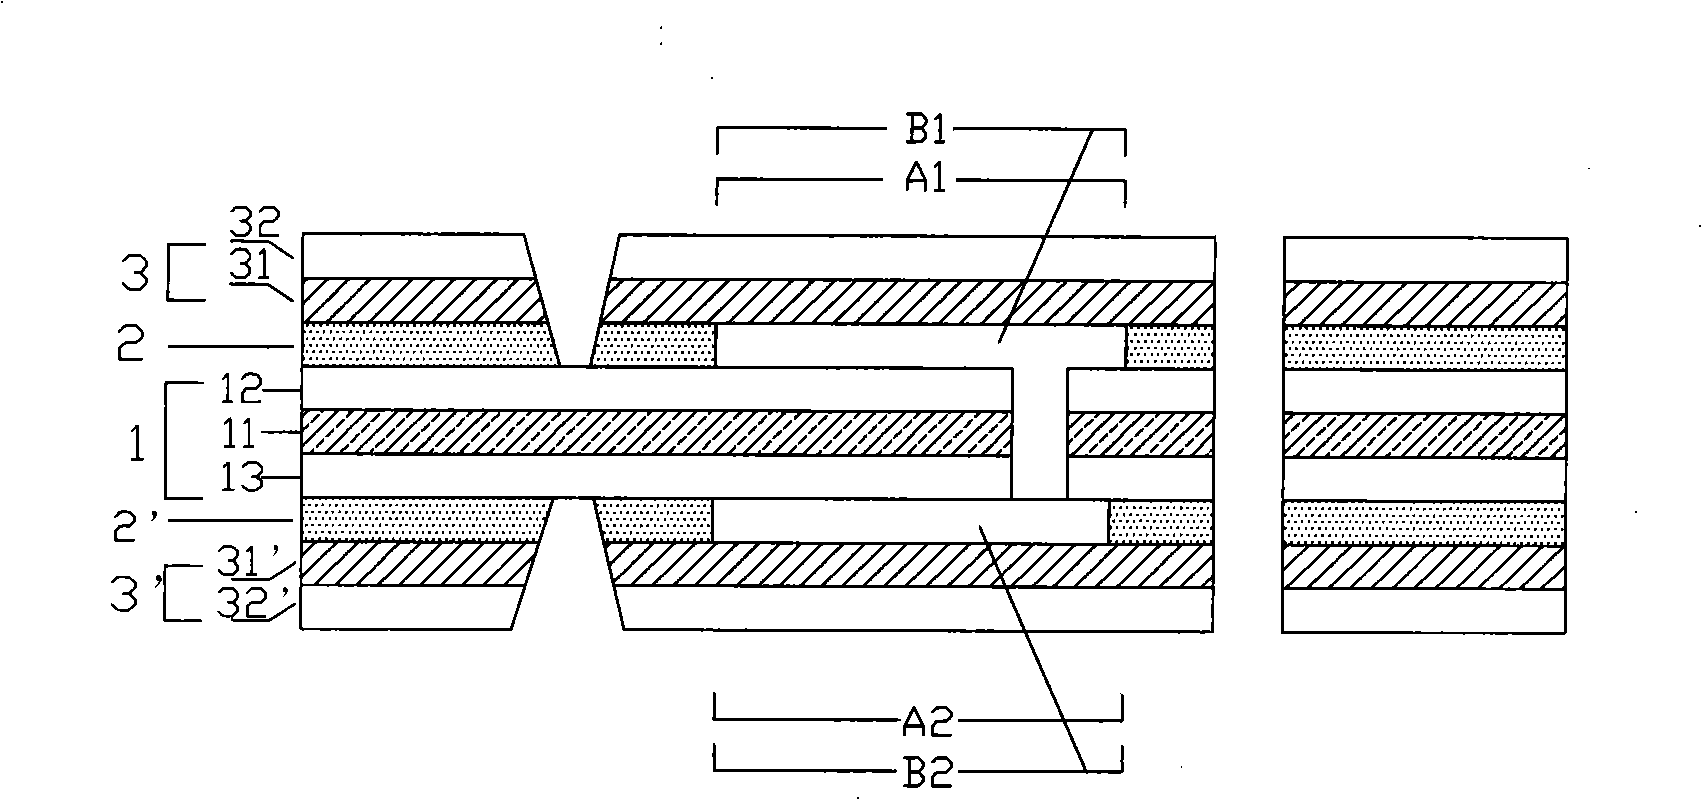 Soft and hard combined printed wiring board production method